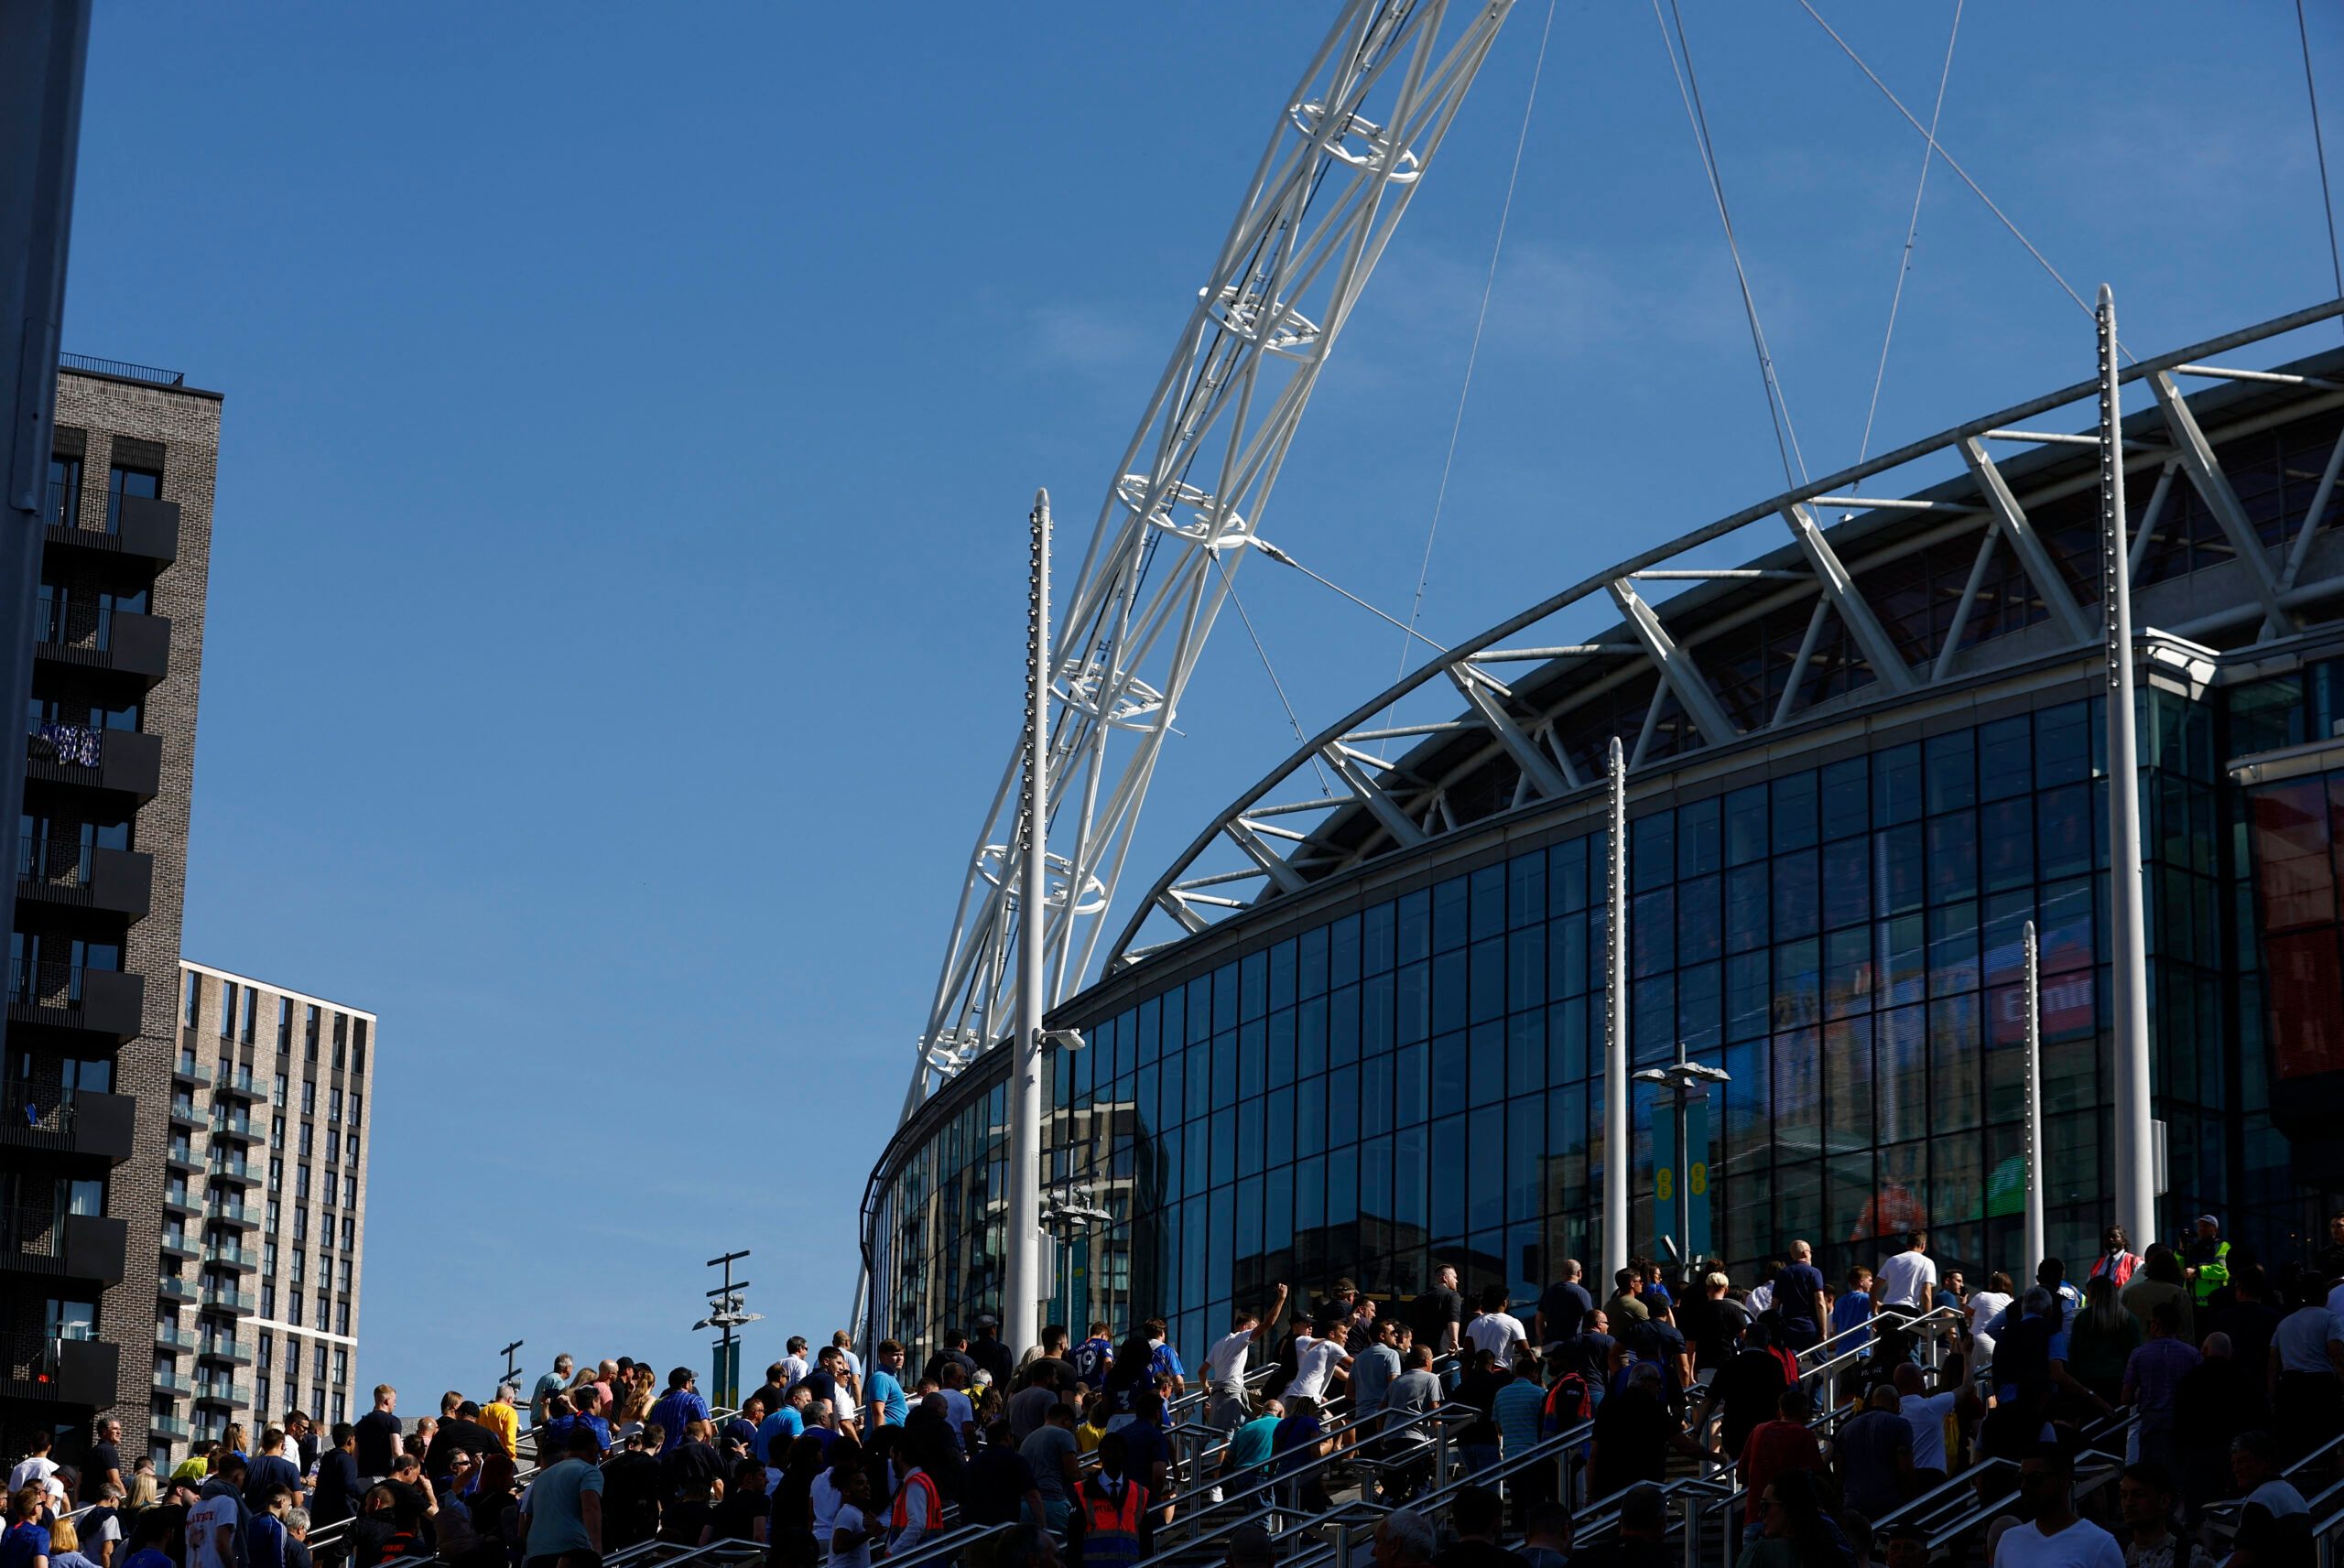 Soccer Football - FA Cup - Final - Chelsea v Liverpool - Wembley Stadium, London, Britain - May 14, 2022 General view as fans arrive outside the stadium before the match Action Images via Reuters/Andrew Boyers